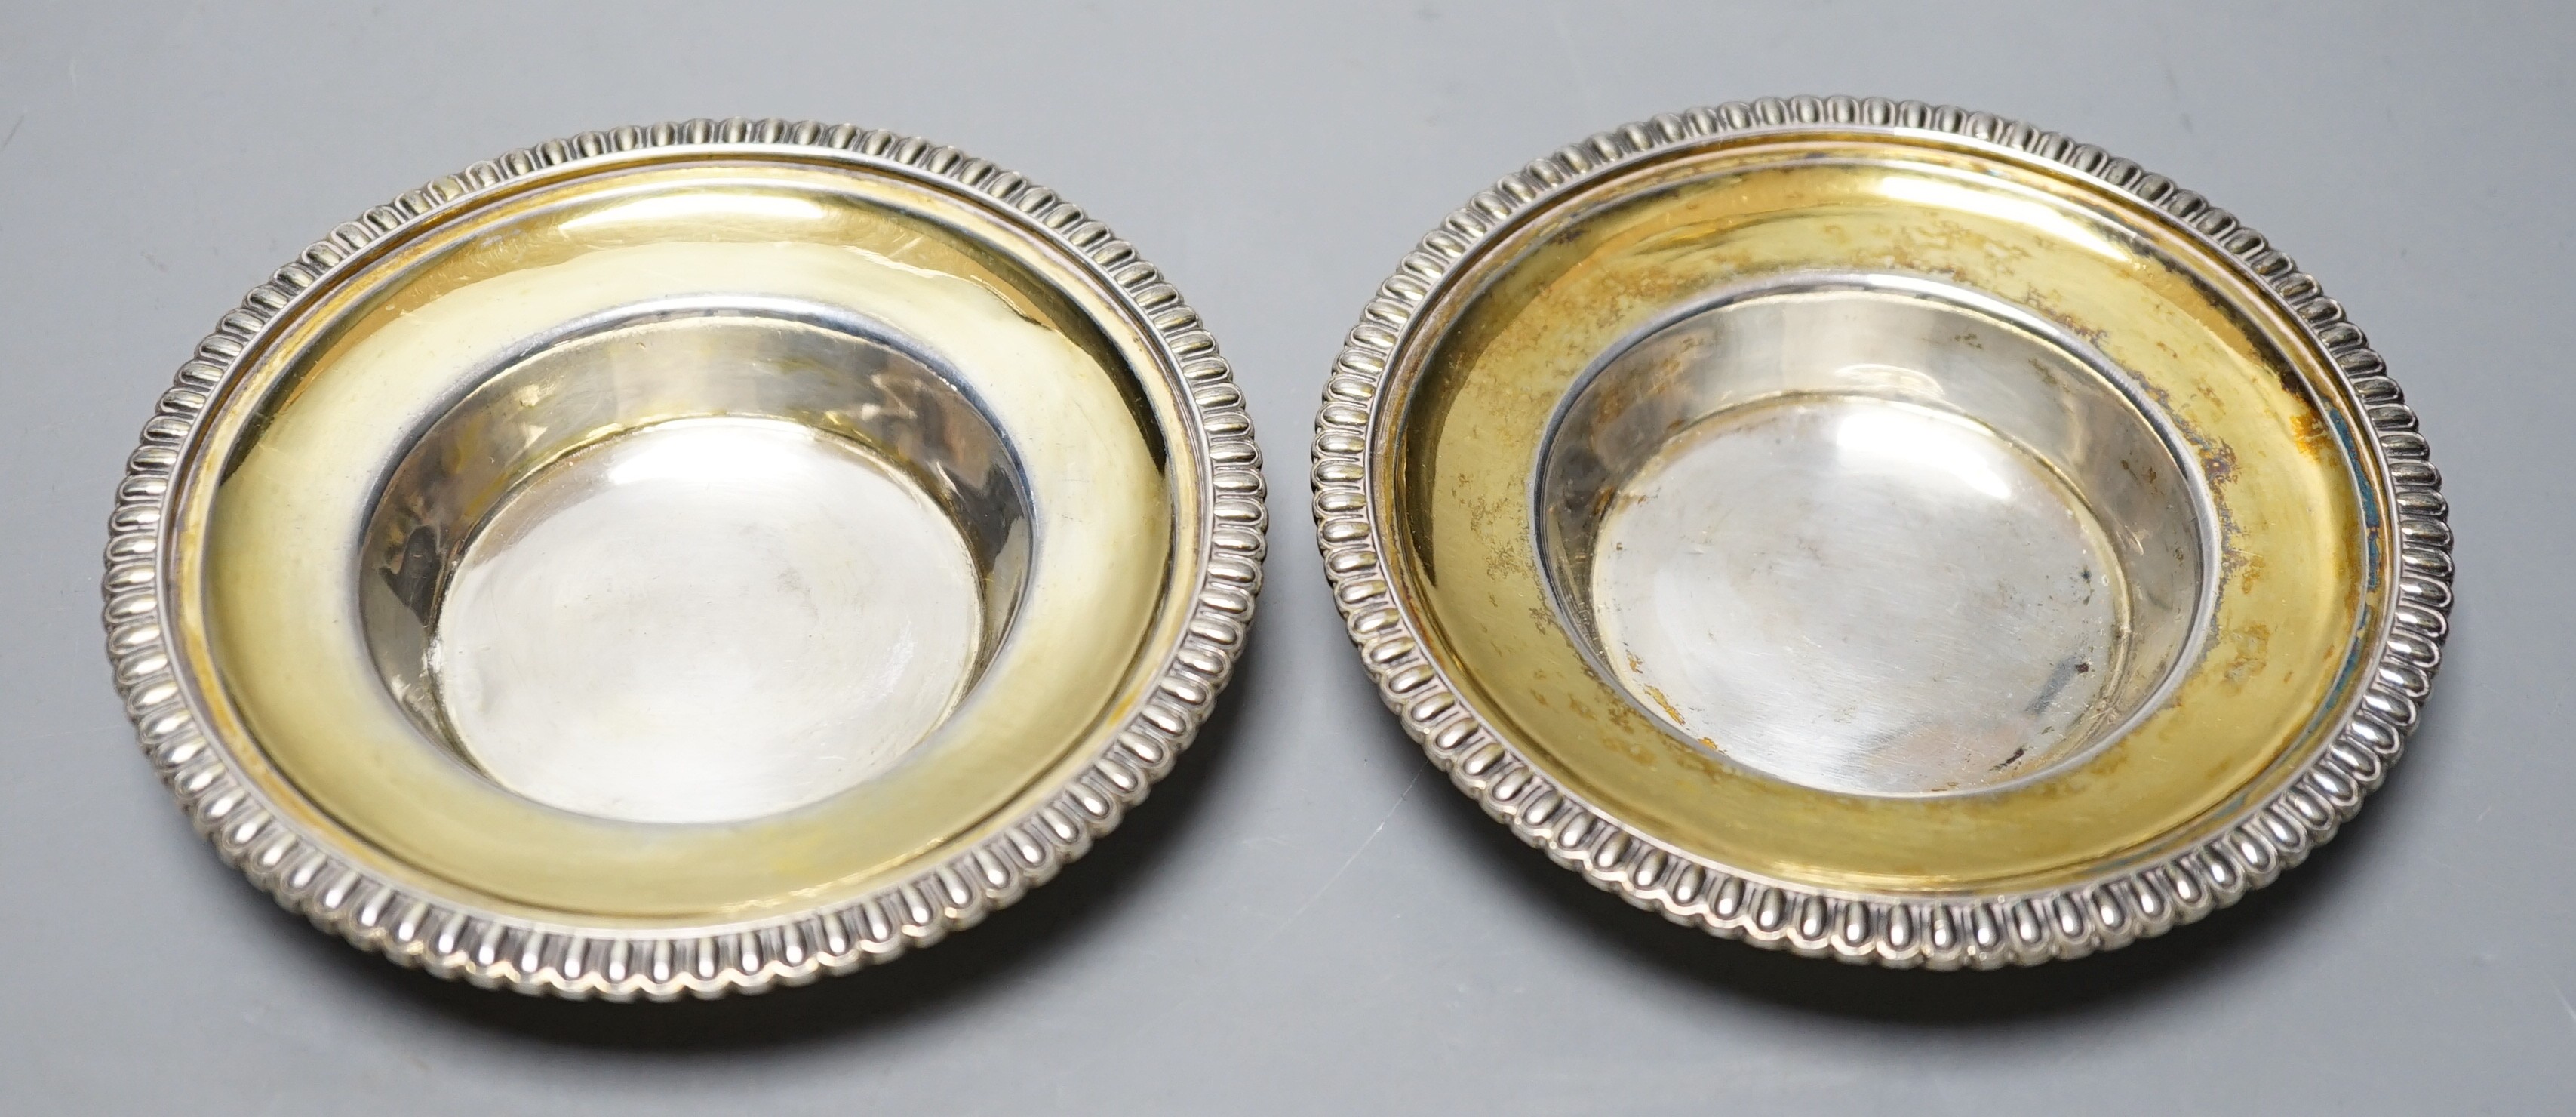 A pair of George III parcel gilt silver circular stands, with gadrooned borders, Emes & Barnard, London, 1814, 11cm, 5.4oz.